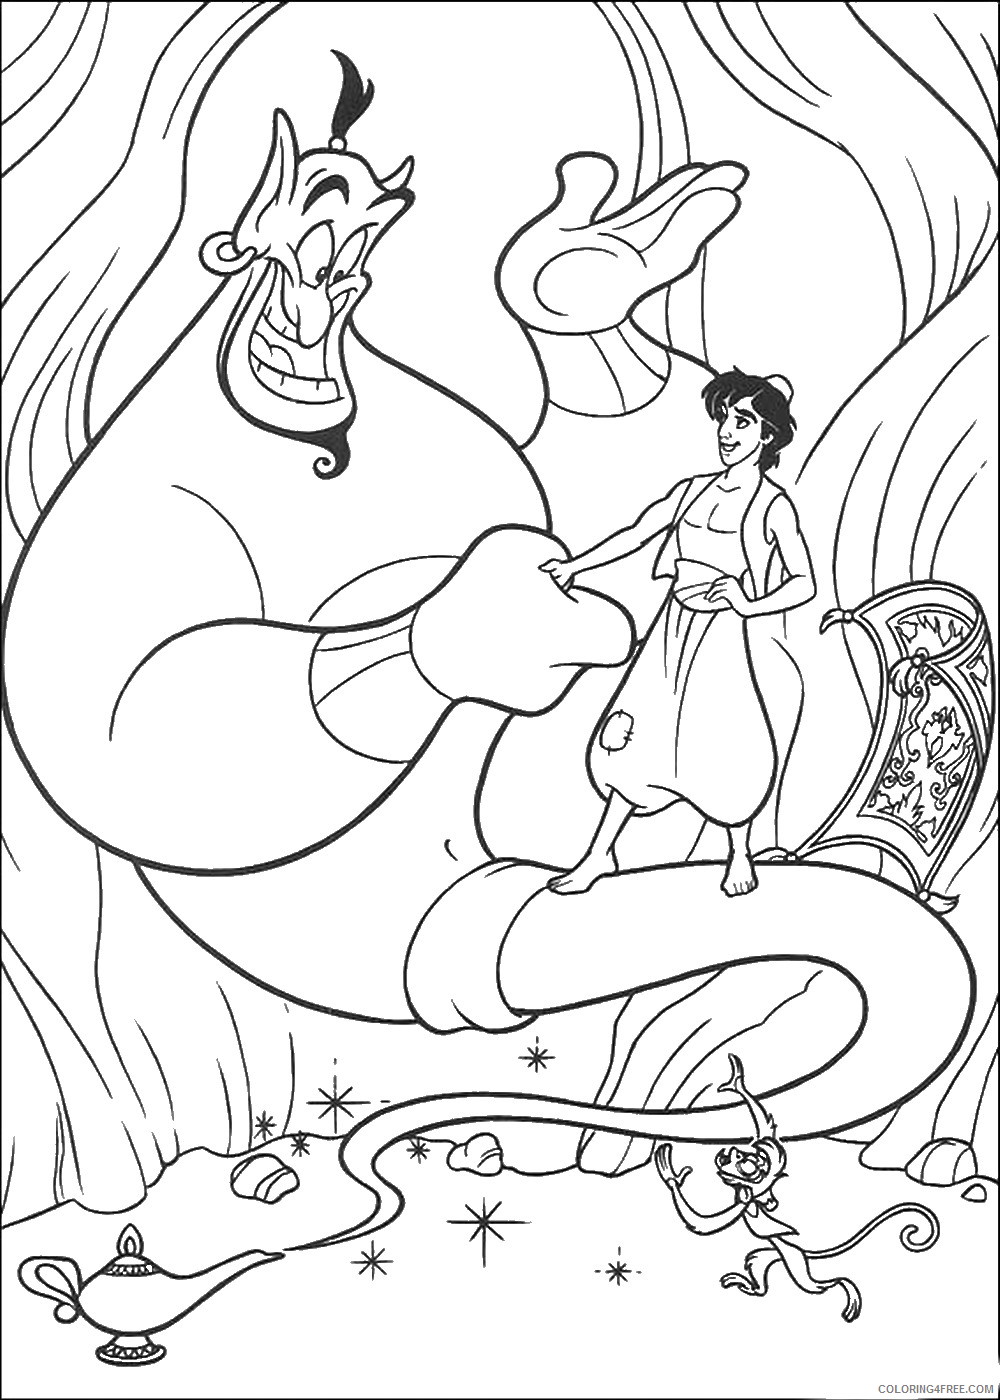 Aladdin Coloring Pages Cartoons aladdin_15 Printable 2020 0293 Coloring4free